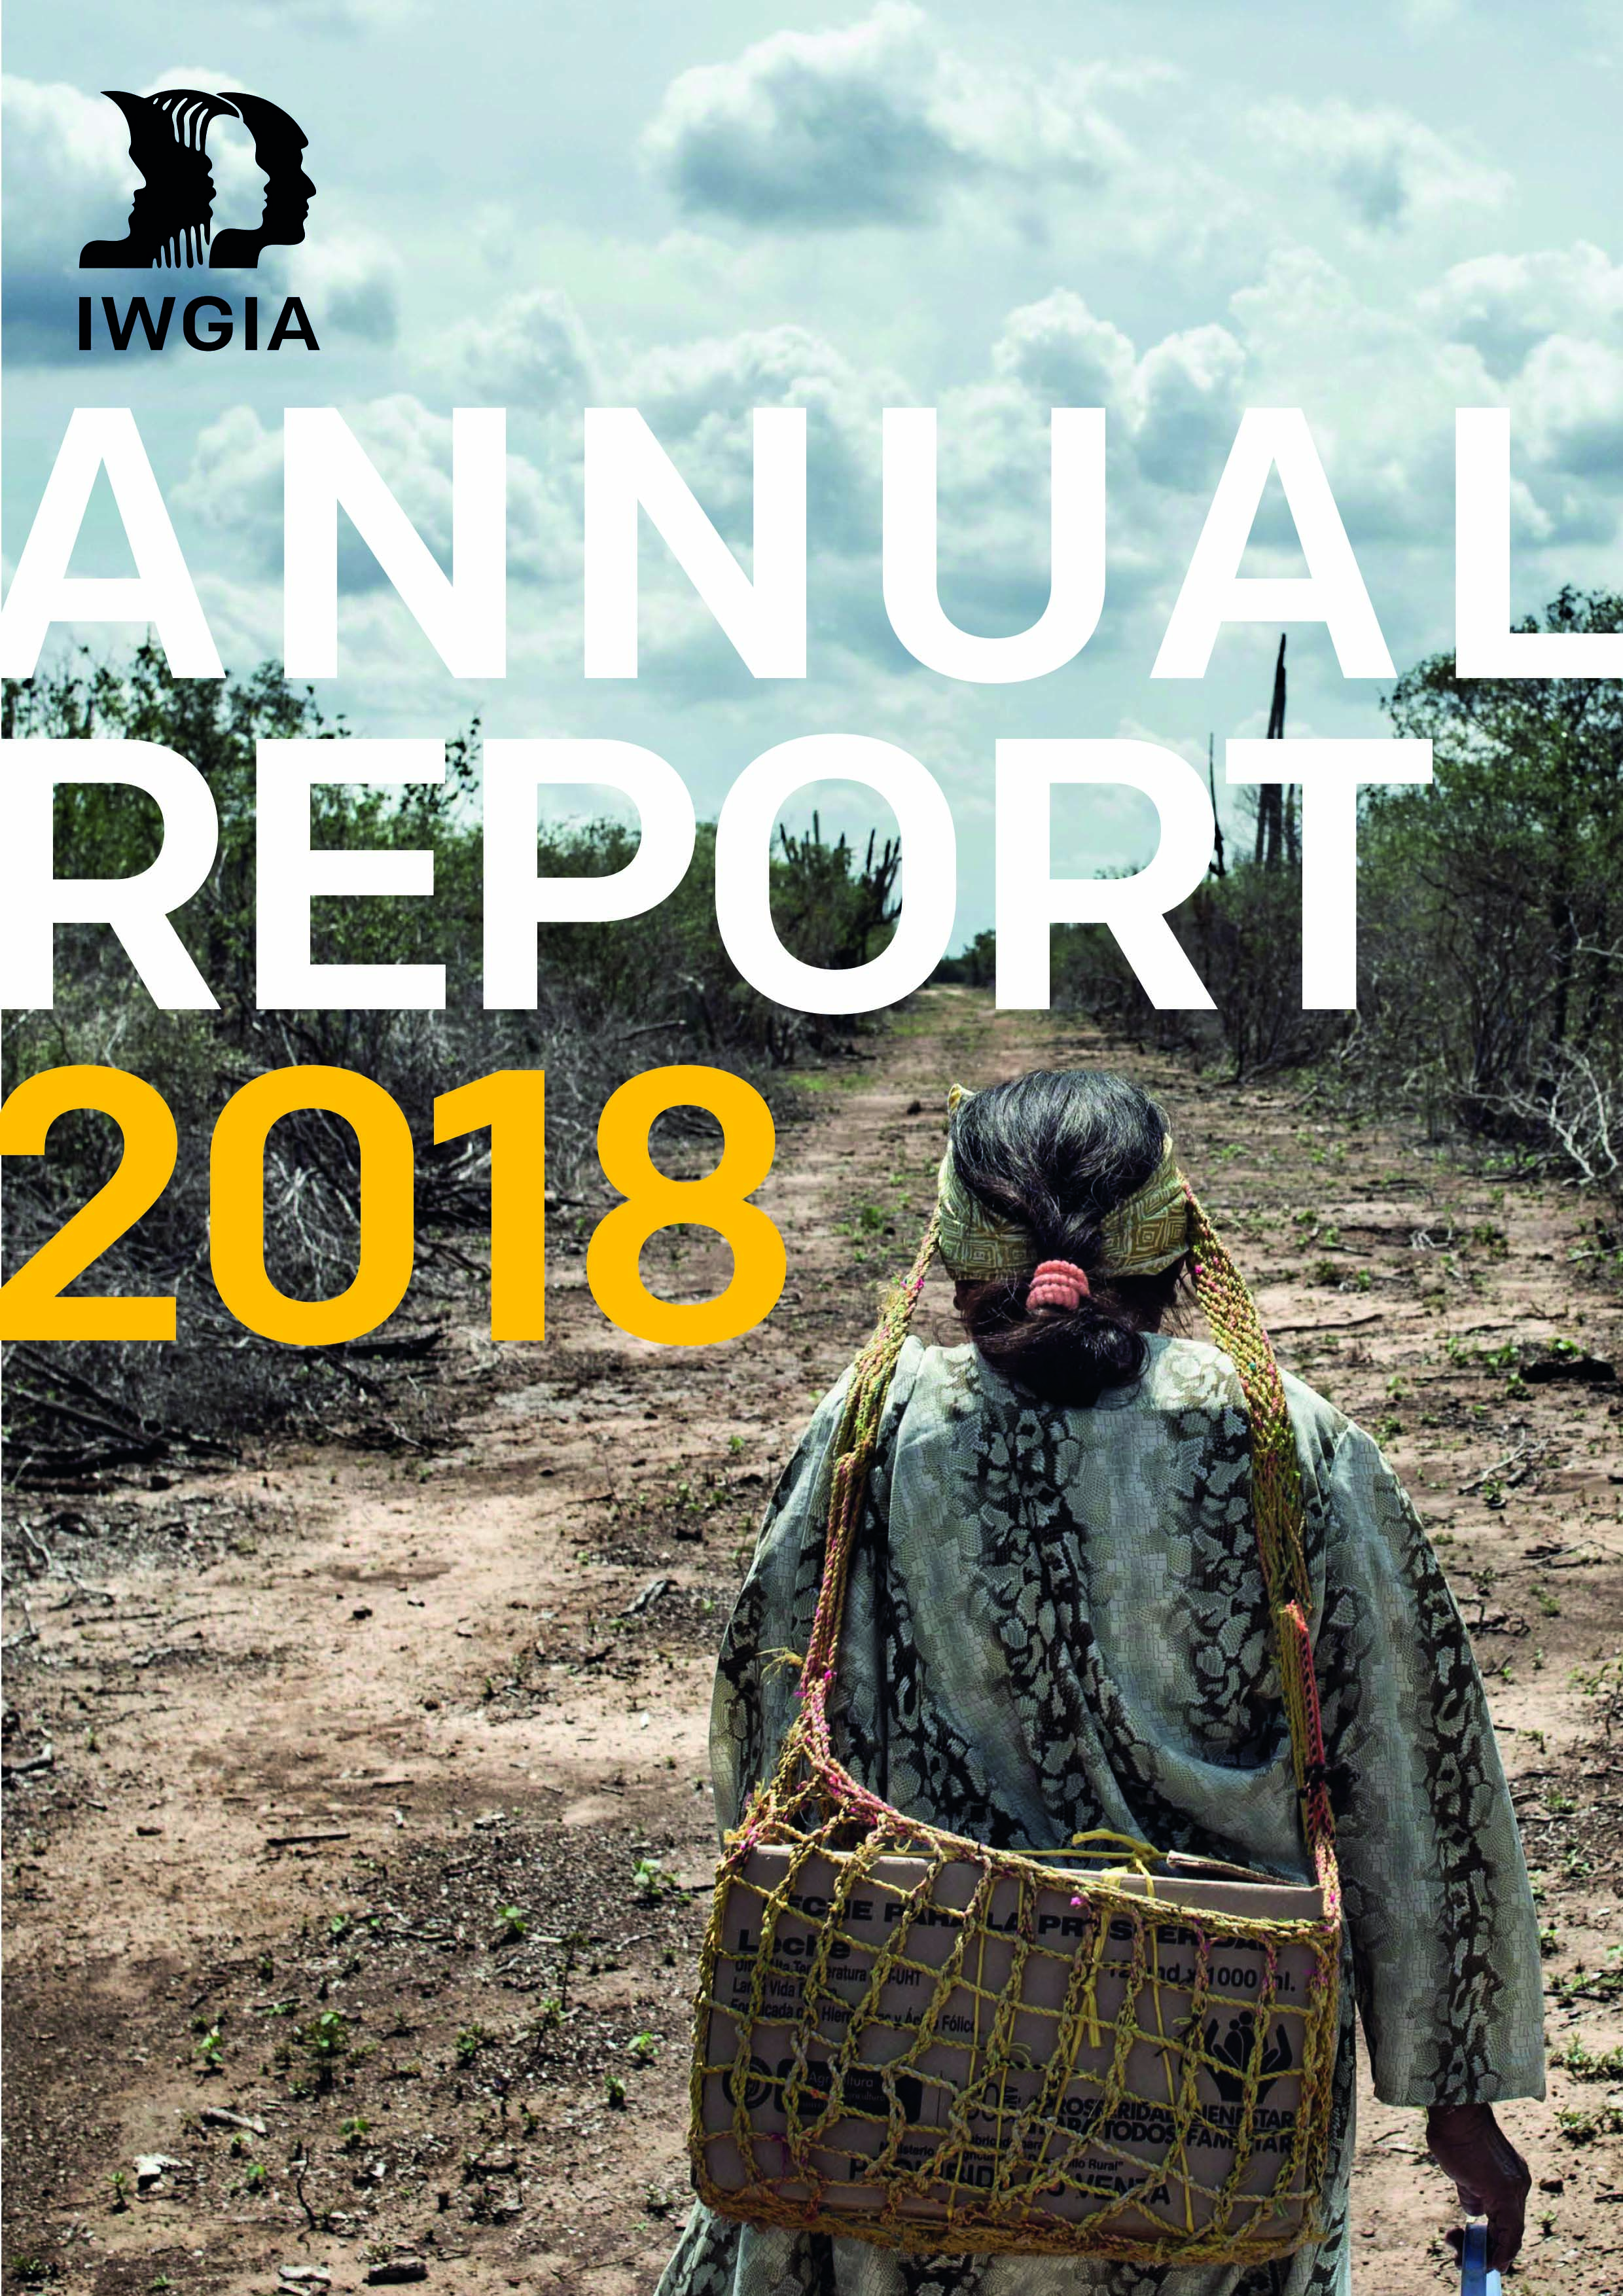 This annual report presents some of the many significant achievements IWGIA supported in 2018 for indigenous peoples' rights.